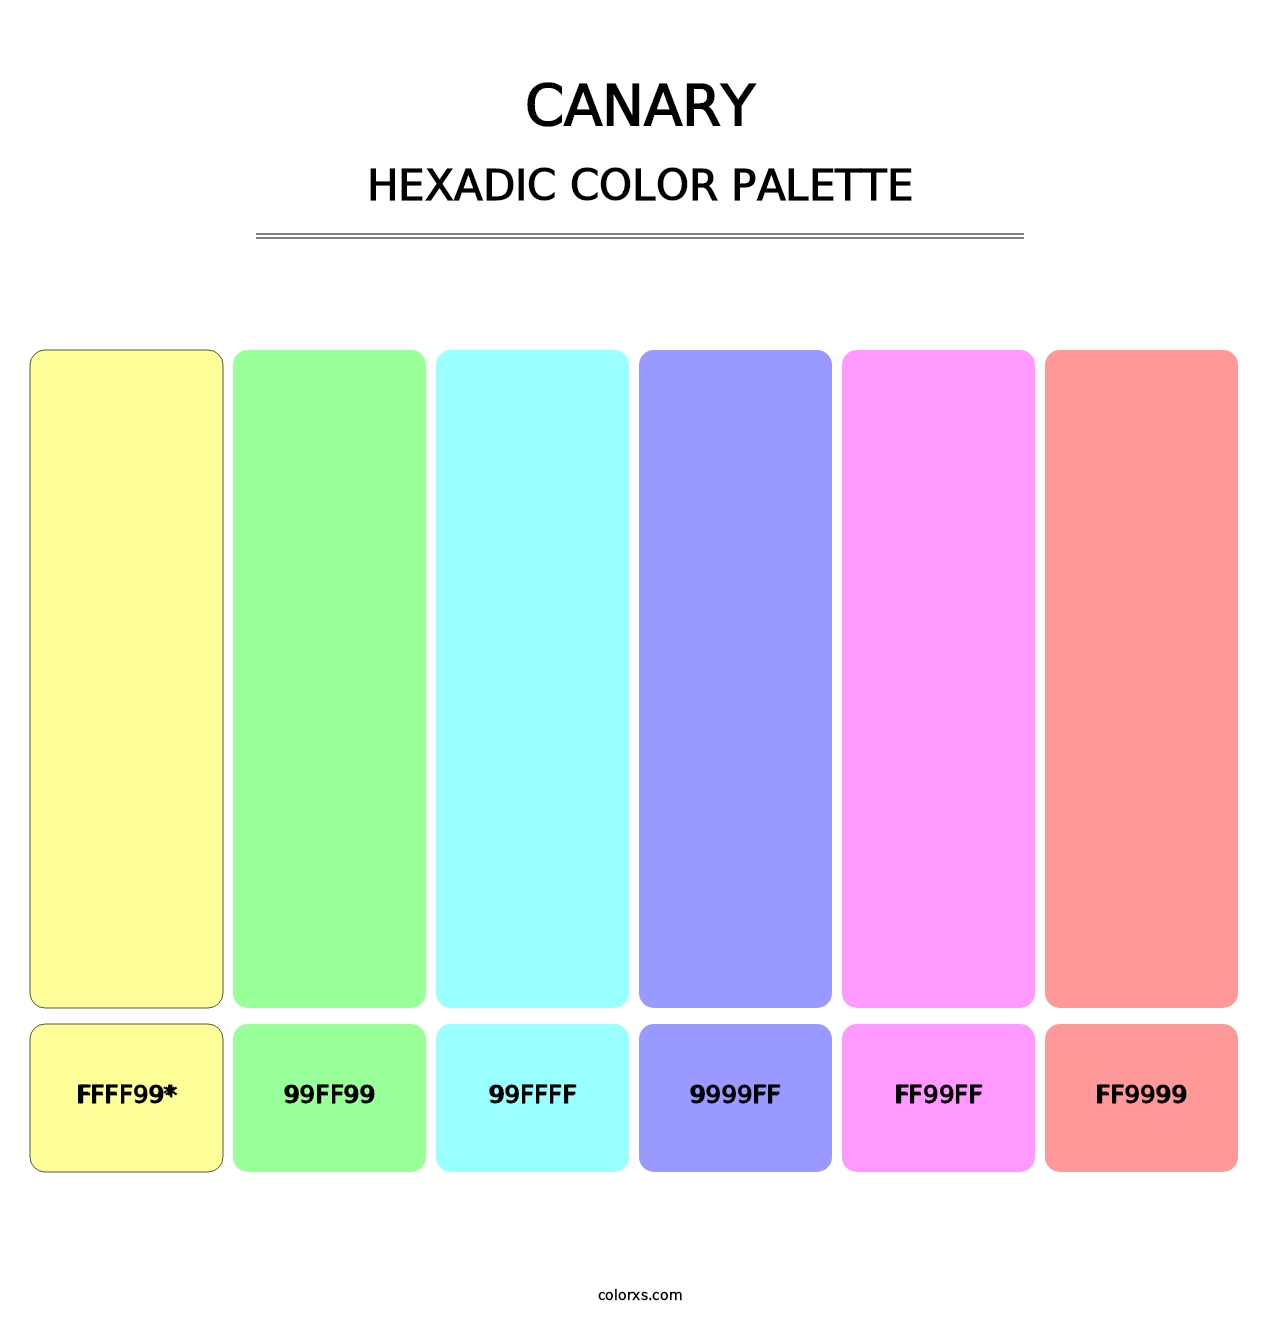 Canary - Hexadic Color Palette